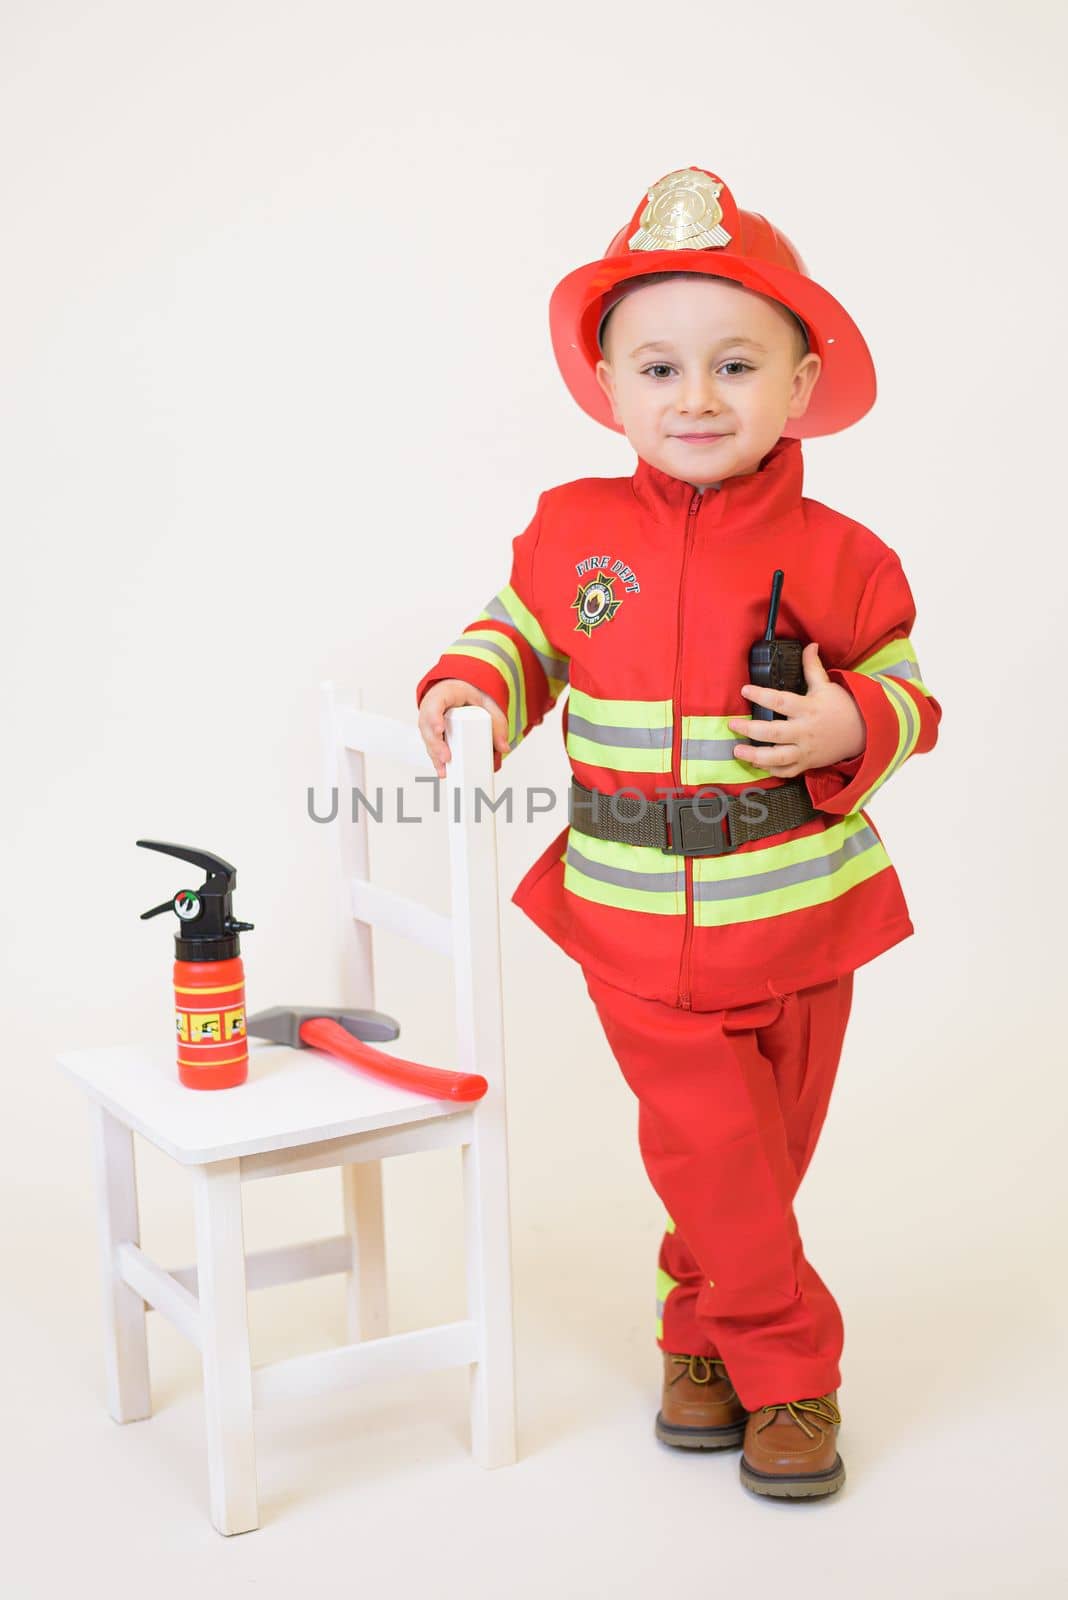 Little toddler child, playing with fire truck car toy and little chicks at home, kid and pet friends playing by jcdiazhidalgo